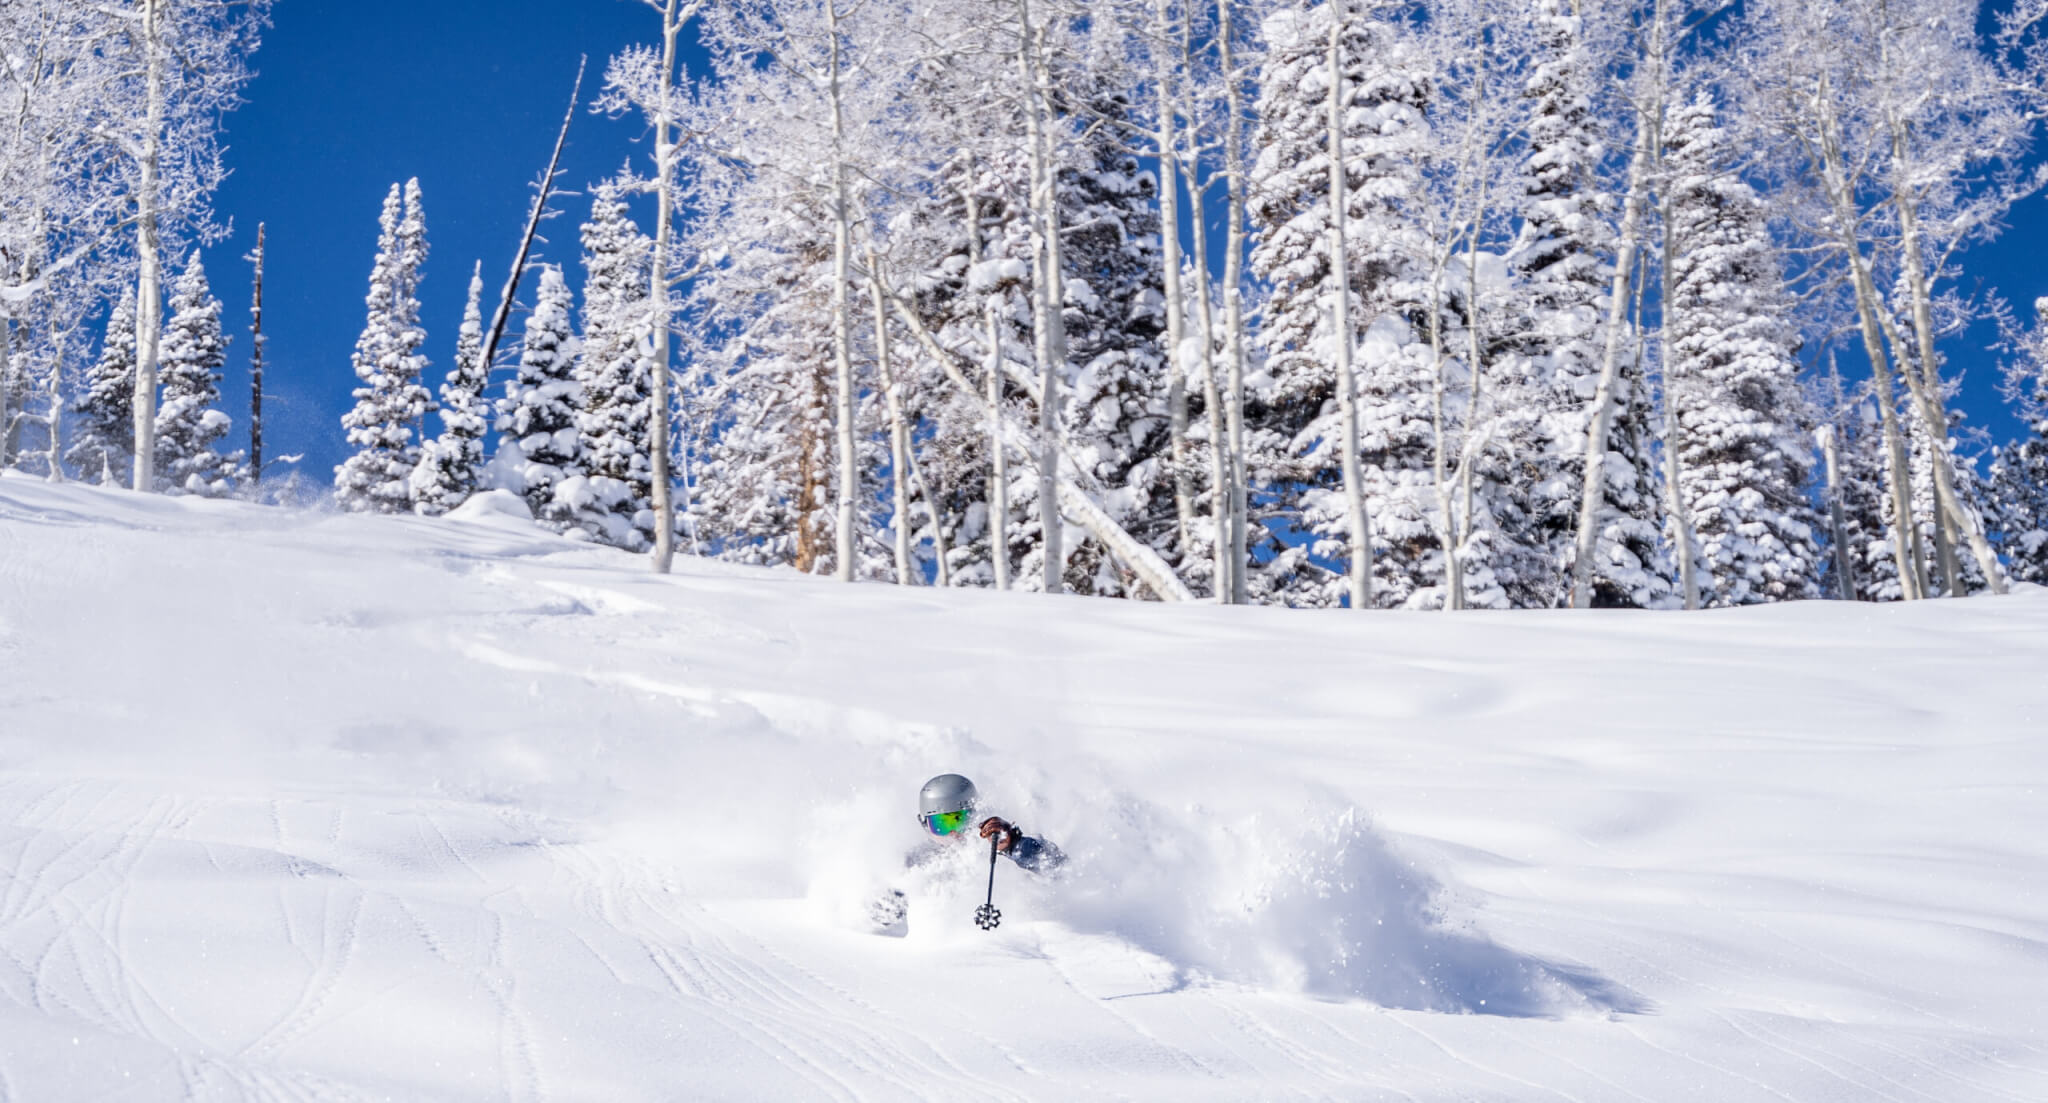 500 Inches at Solitude: Utah Ski Resorts Seeing the Most Snow Since 2004/05